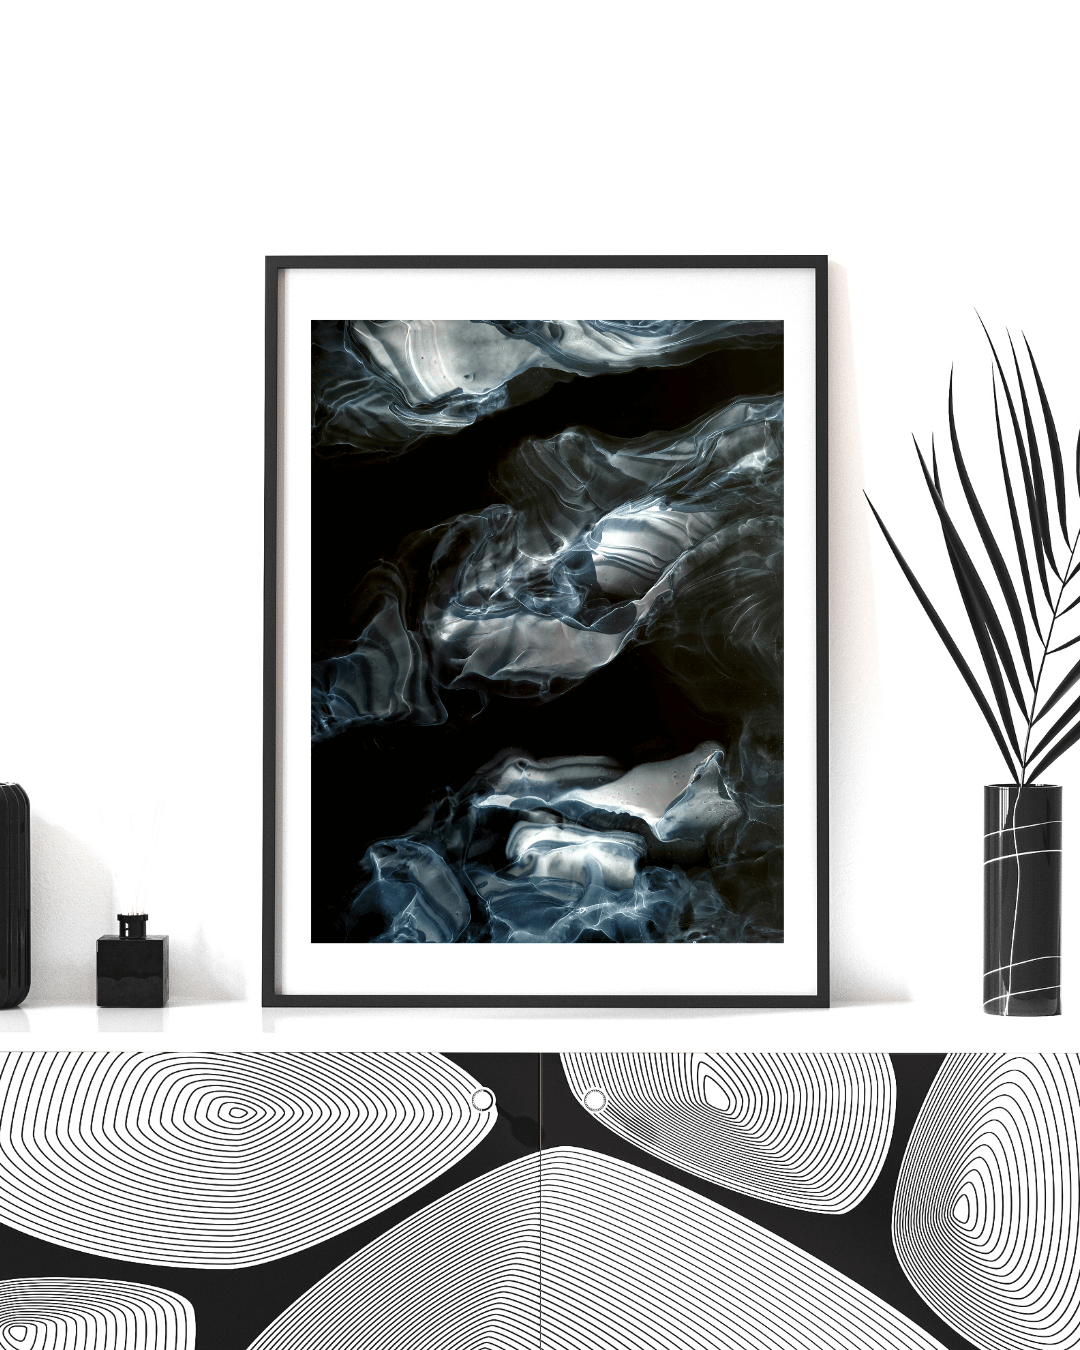 Black and White Abstract Wall Art Print - "Abyss"